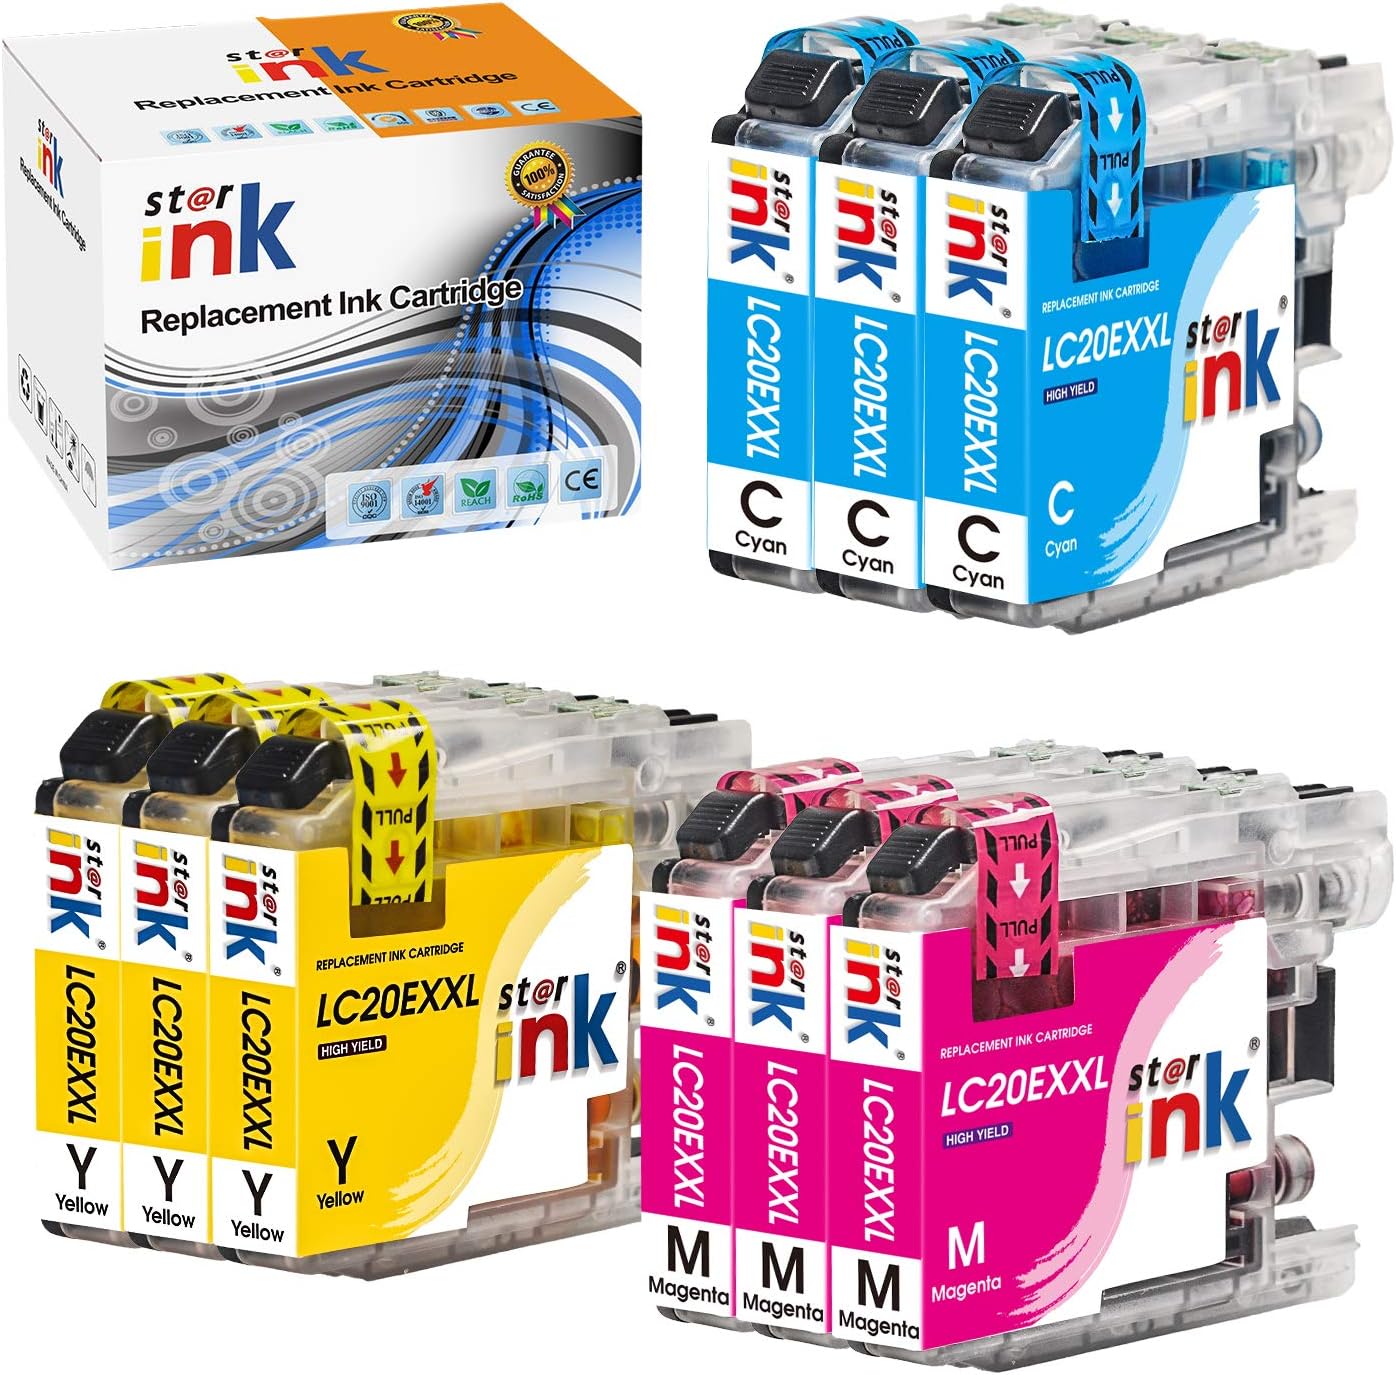 Replacement Brother LC20e Ink Cartridge (3 Cyan, 3 Magenta, 3 Yellow) 9-Pack - Linford Office:Printer Ink & Toner Cartridge